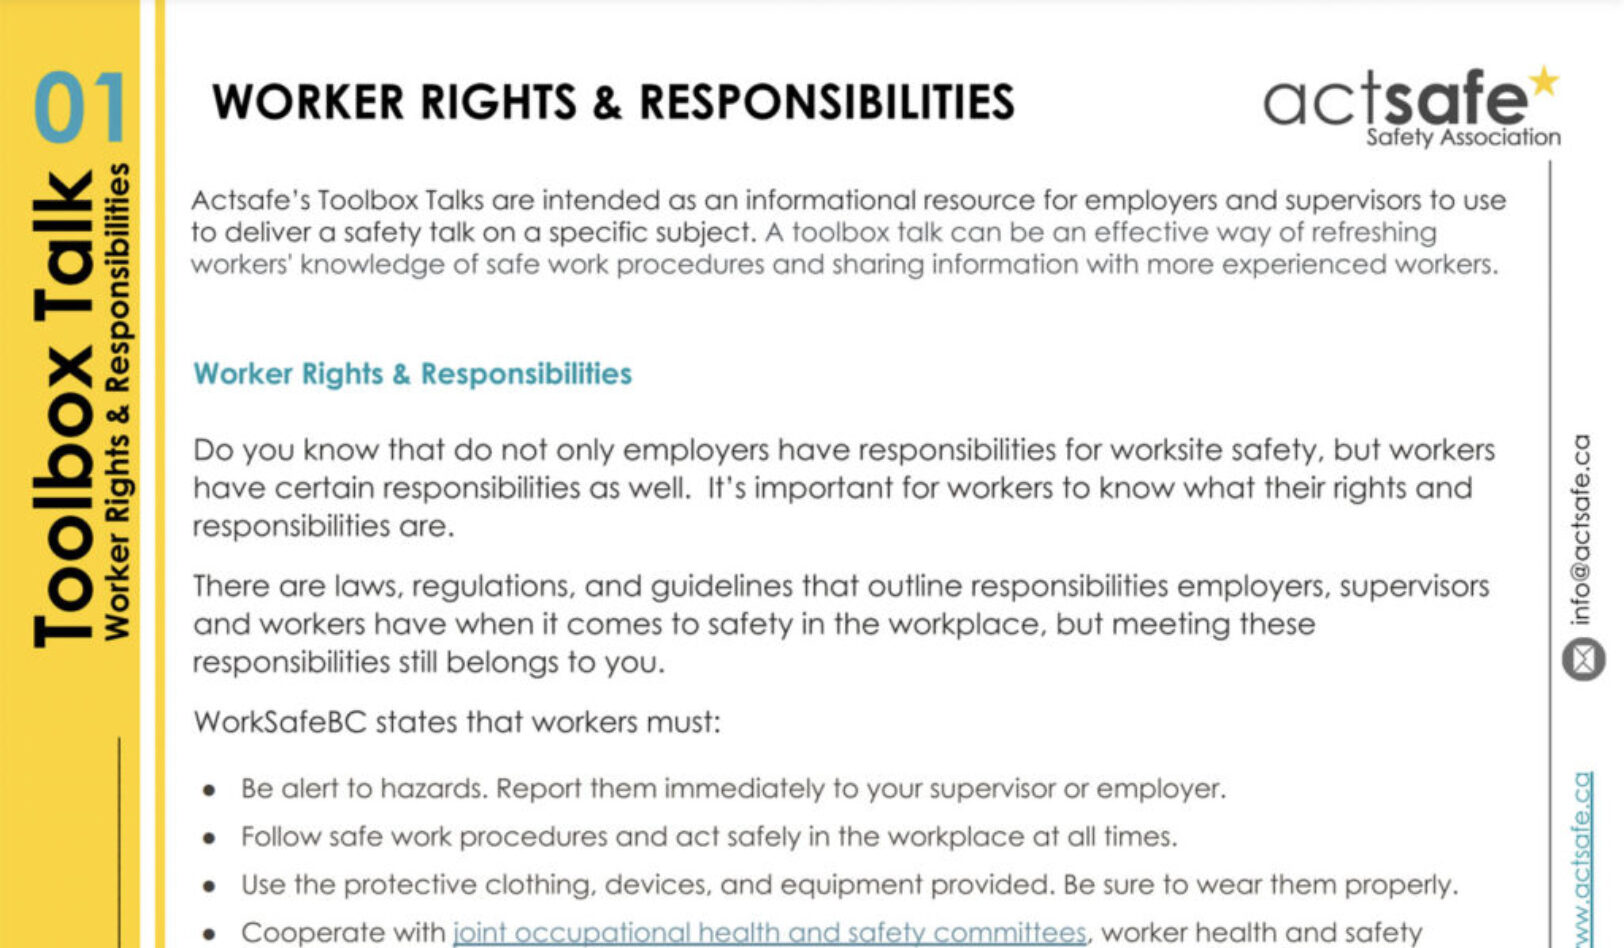 Worker Rights & Responsibilities